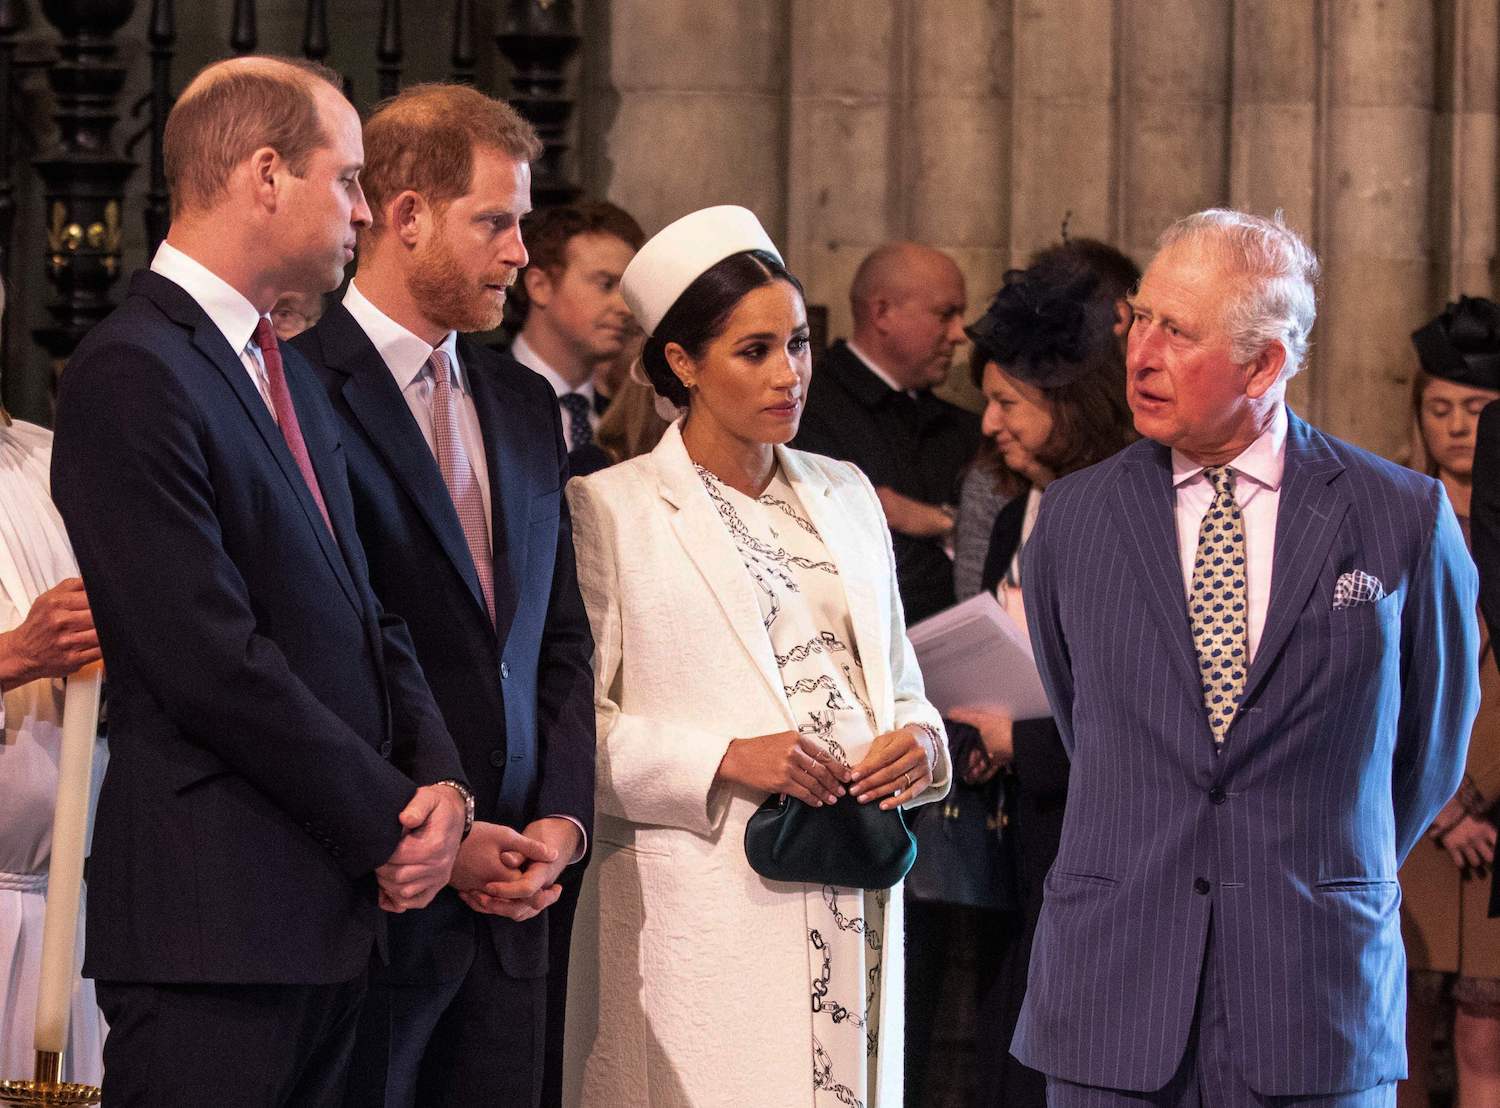 Prince William, Prince Harry, Meghan Markle, and Prince Charles attend the Commonwealth Day service at Westminster Abbey in London